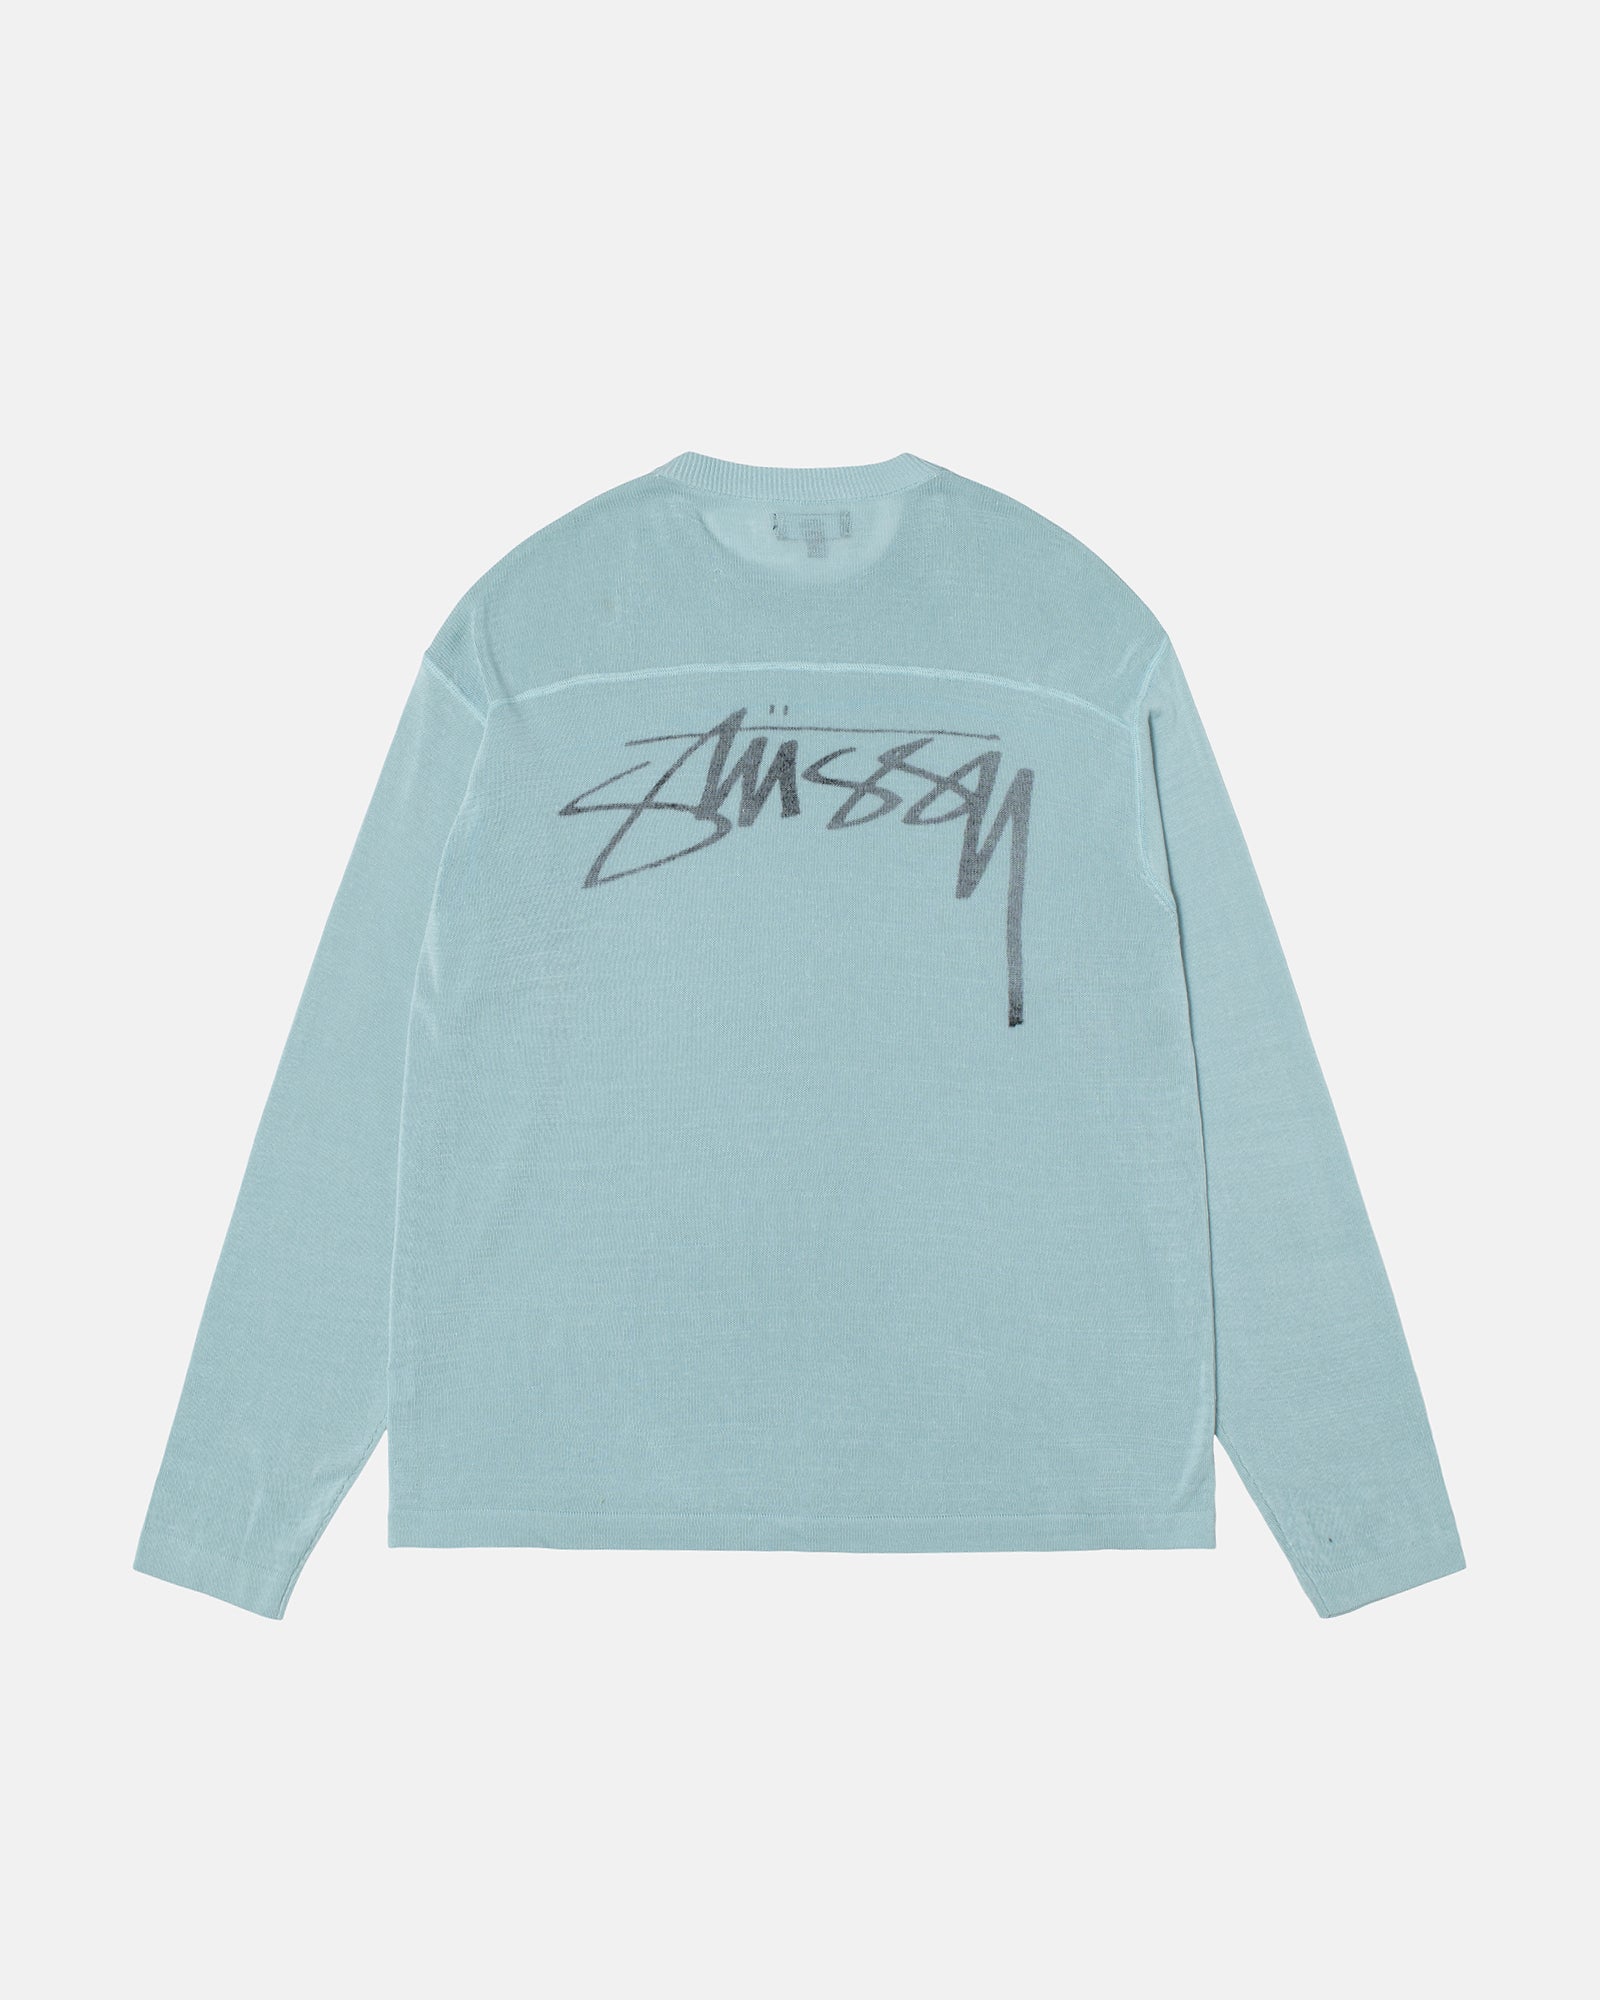 New Arrivals: Hoodies, Beanies, Jackets & More – Stüssy Europe